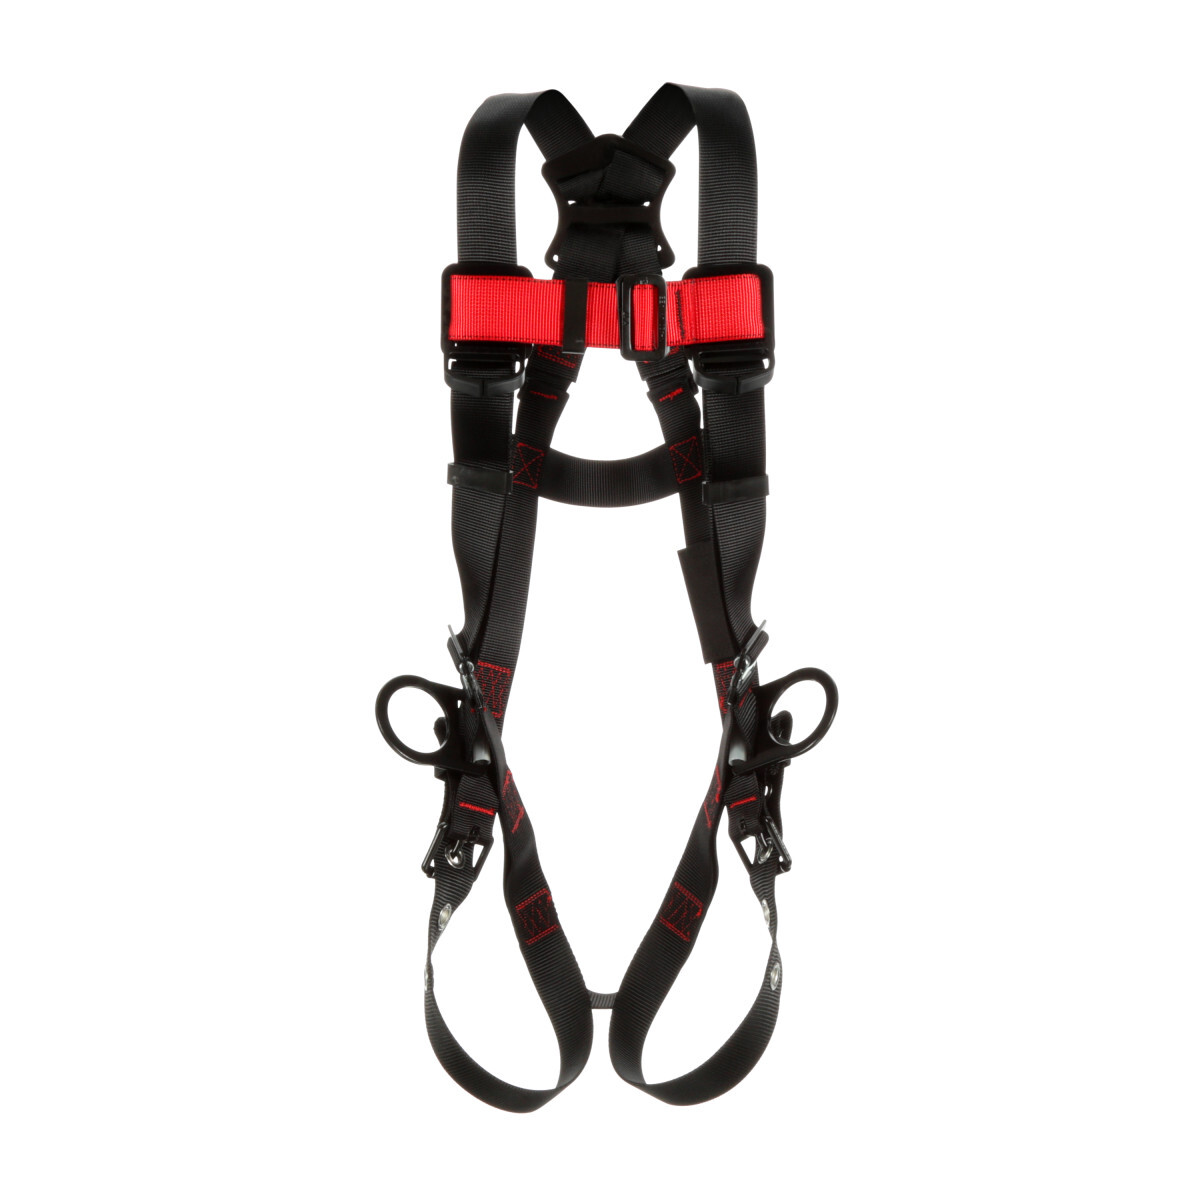 3M™ PROTECTA® Vest-Style Positioning Harness 1161532, Black